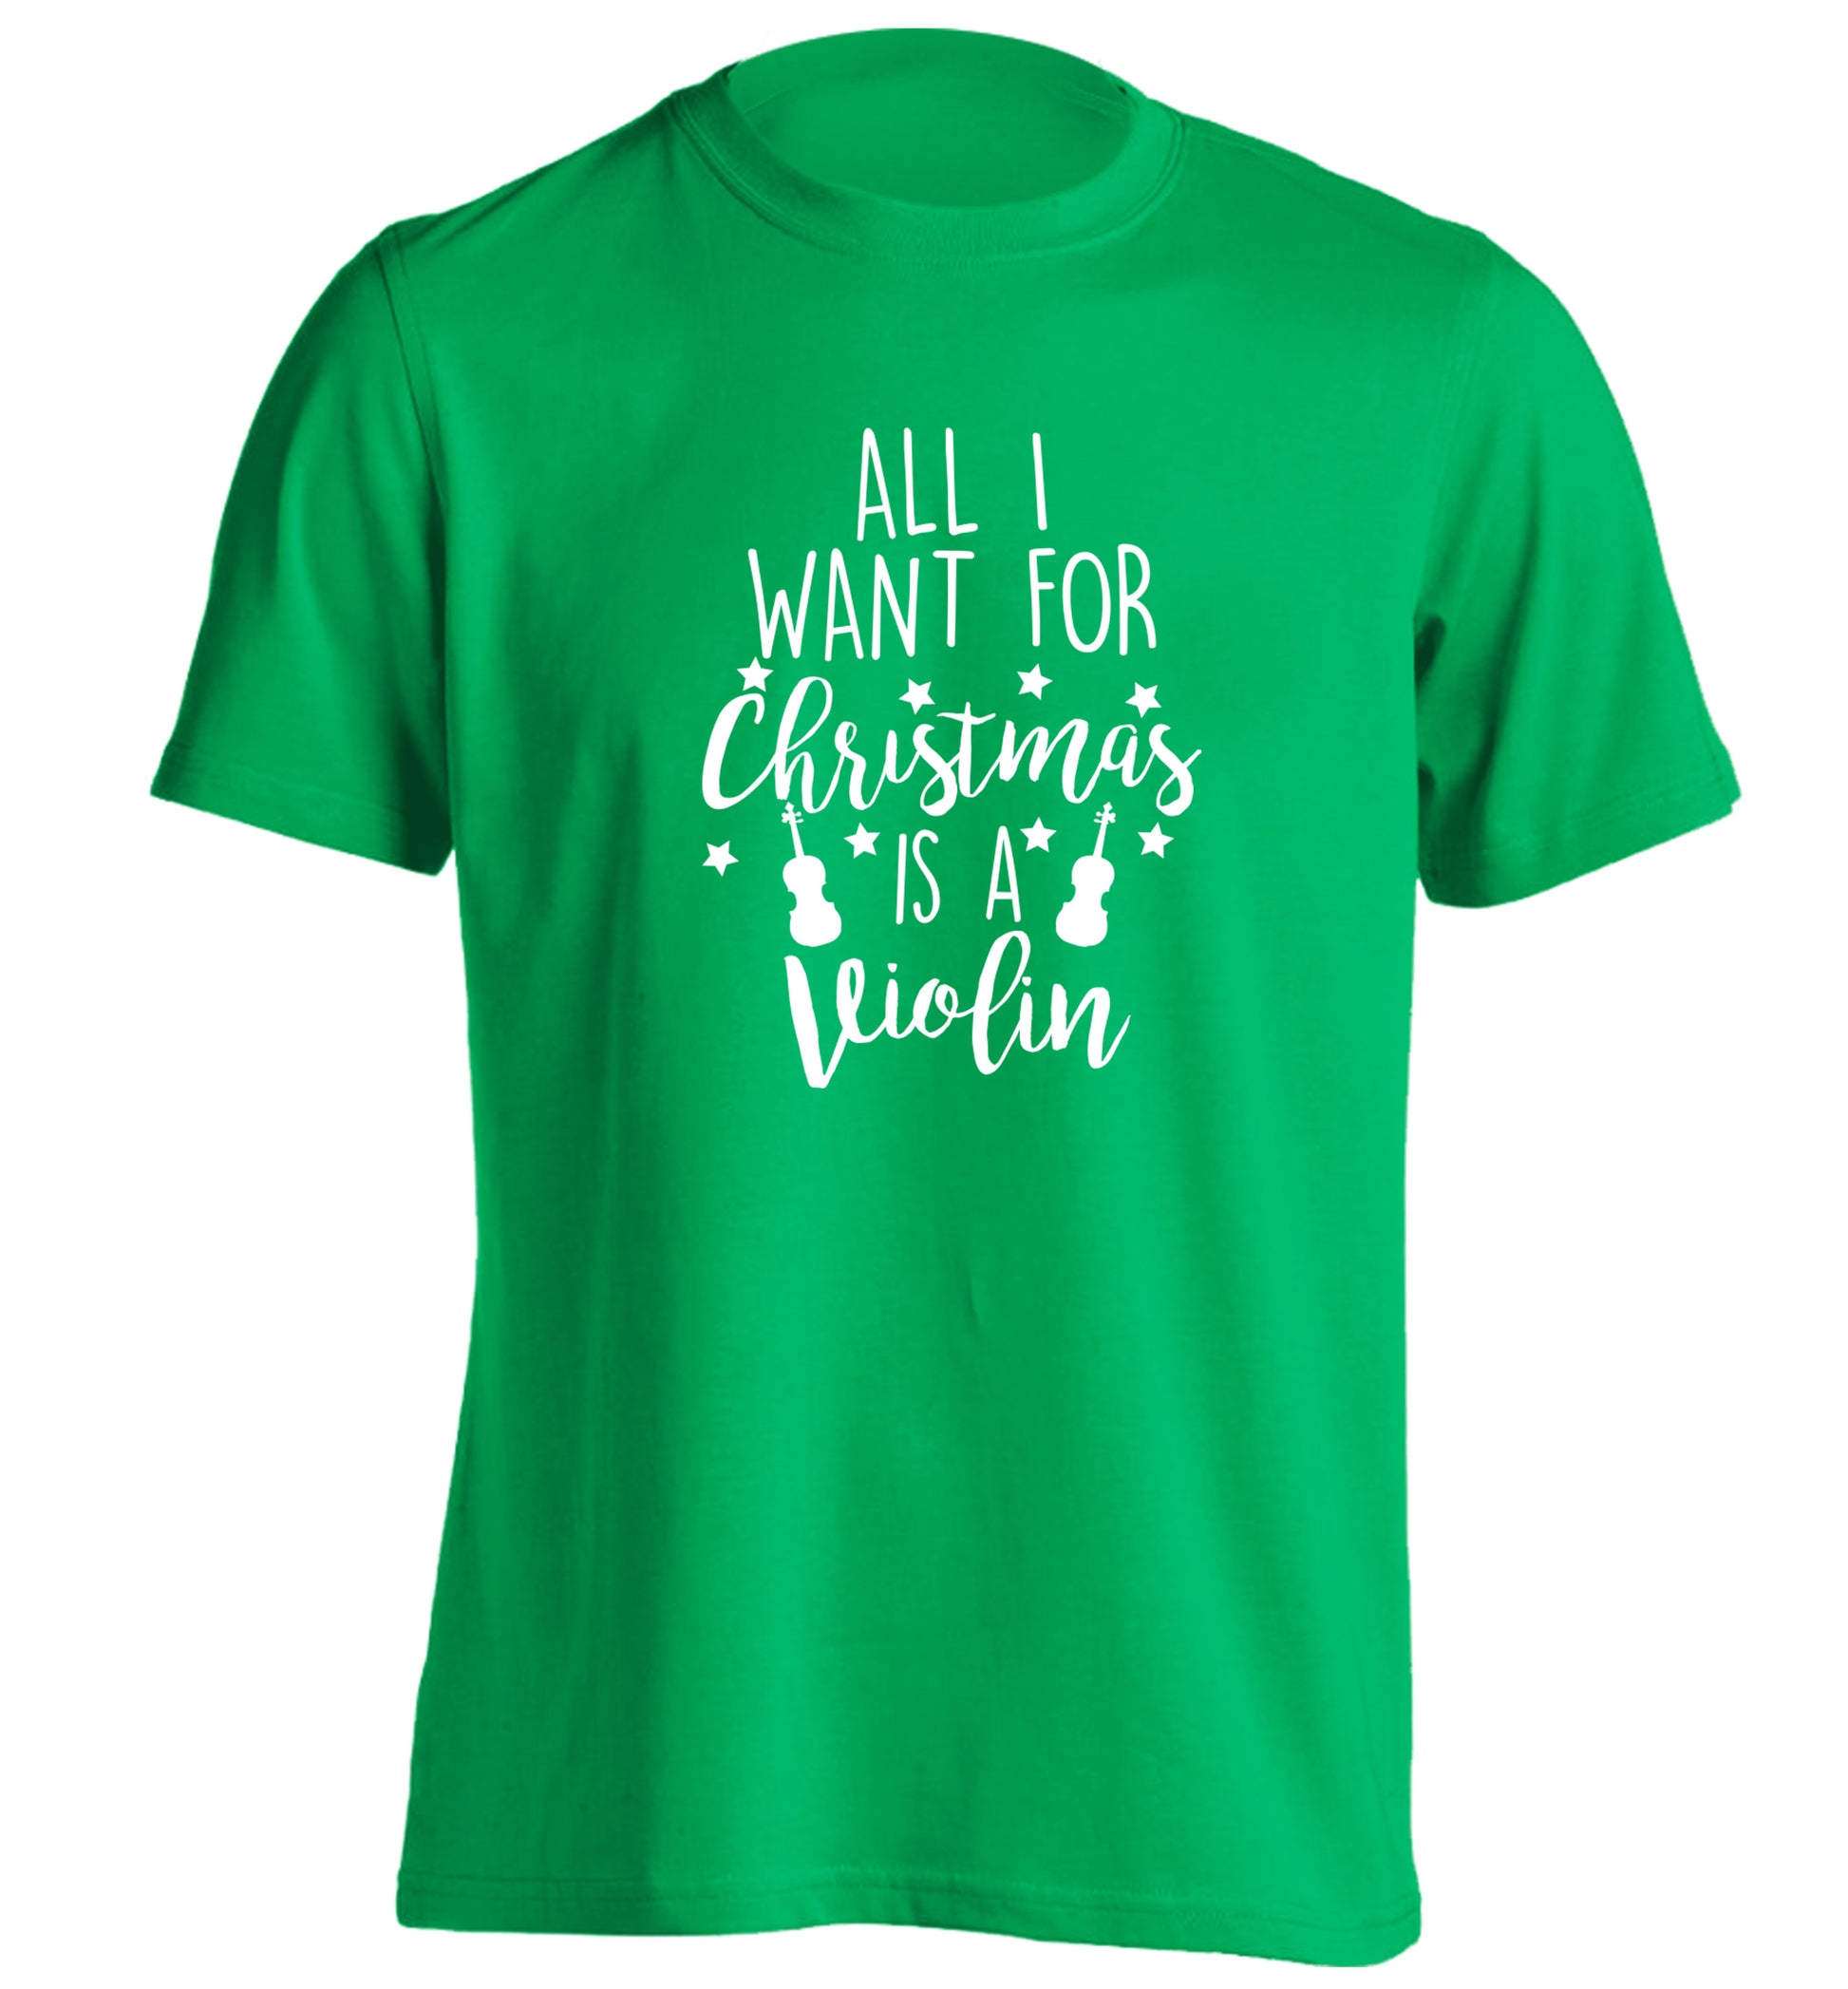 All I Want For Christmas is a Violin adults unisex green Tshirt 2XL